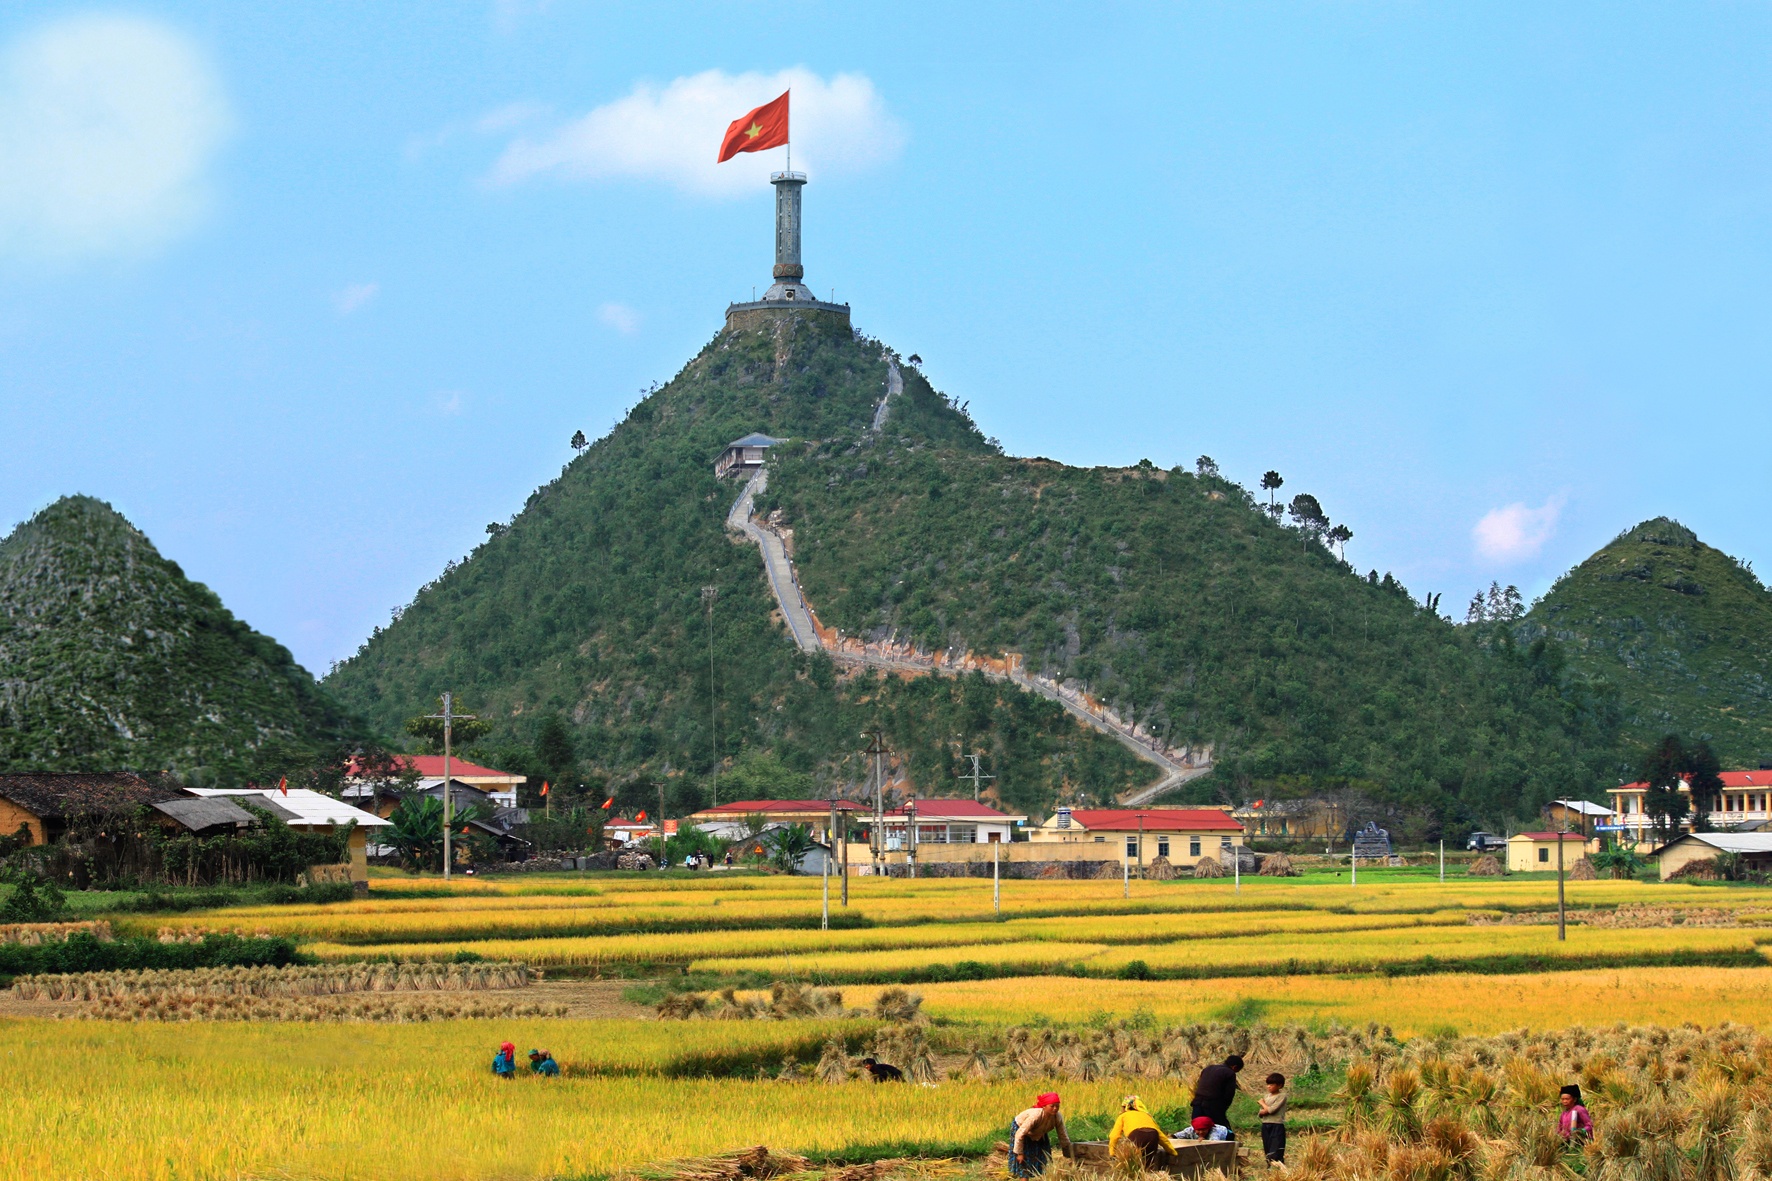 Lung Cu flagpole is the first place in Vietnam's map